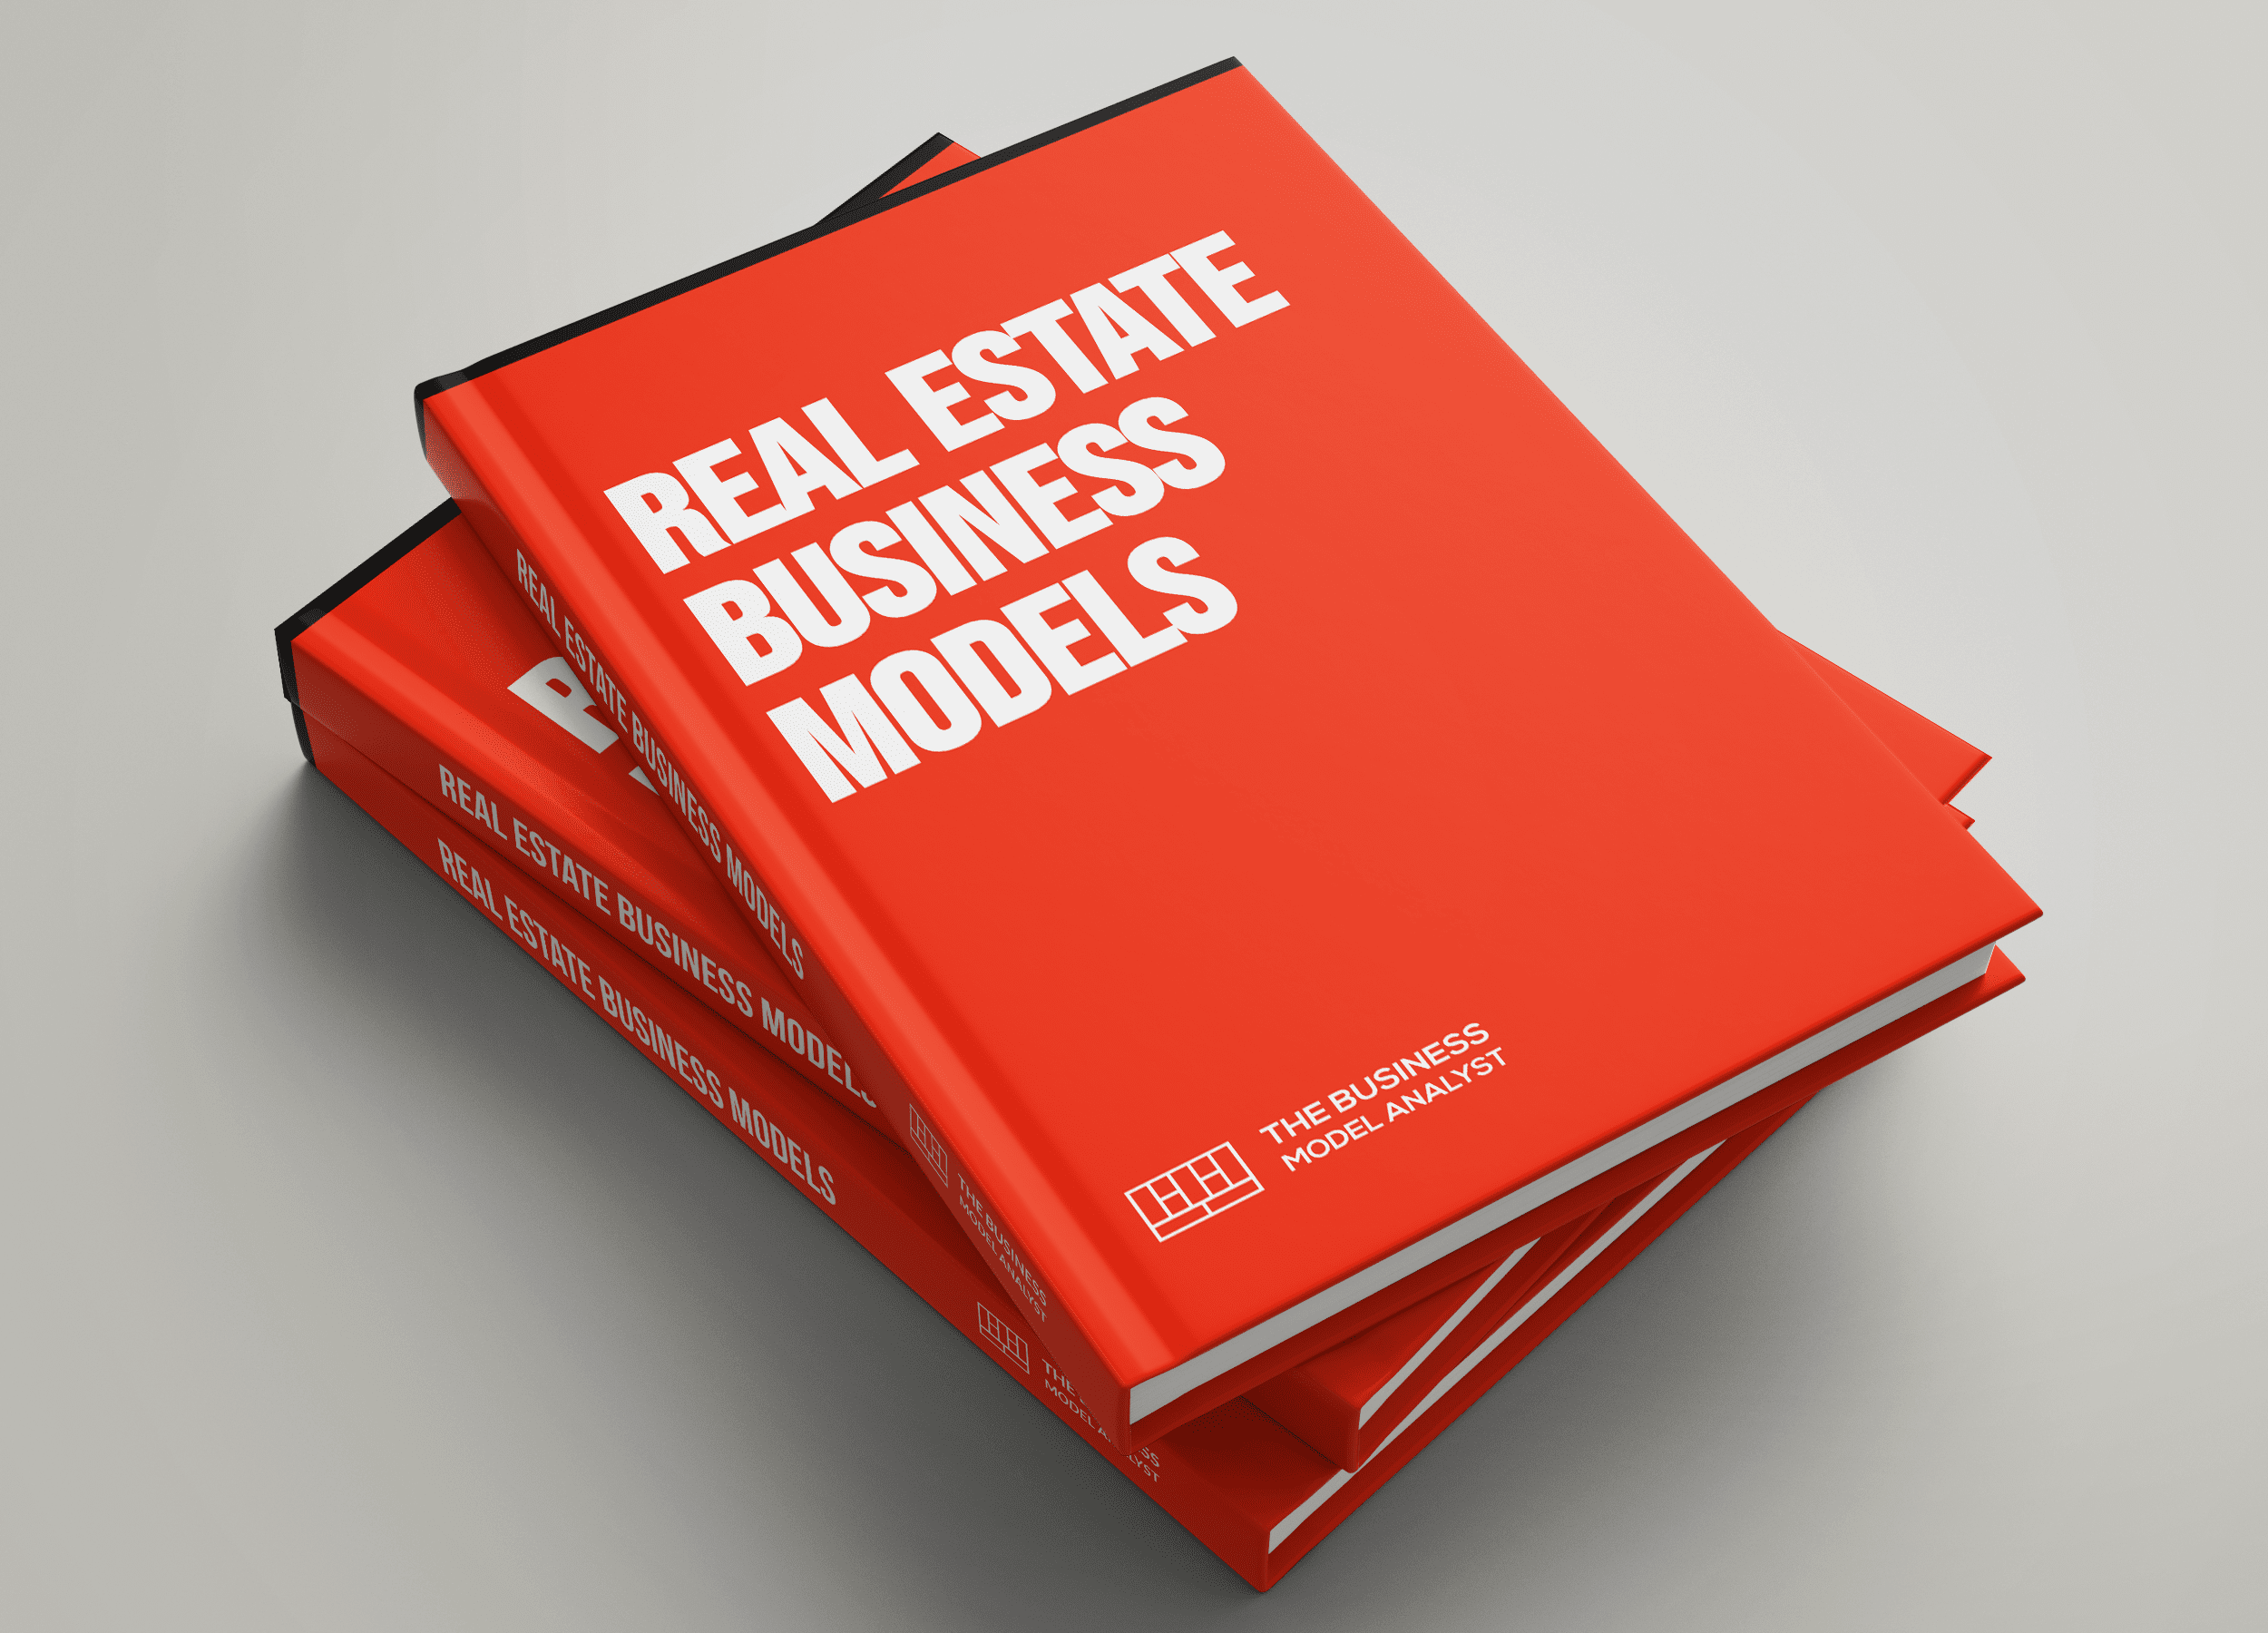 Real Estate Business Models Covers